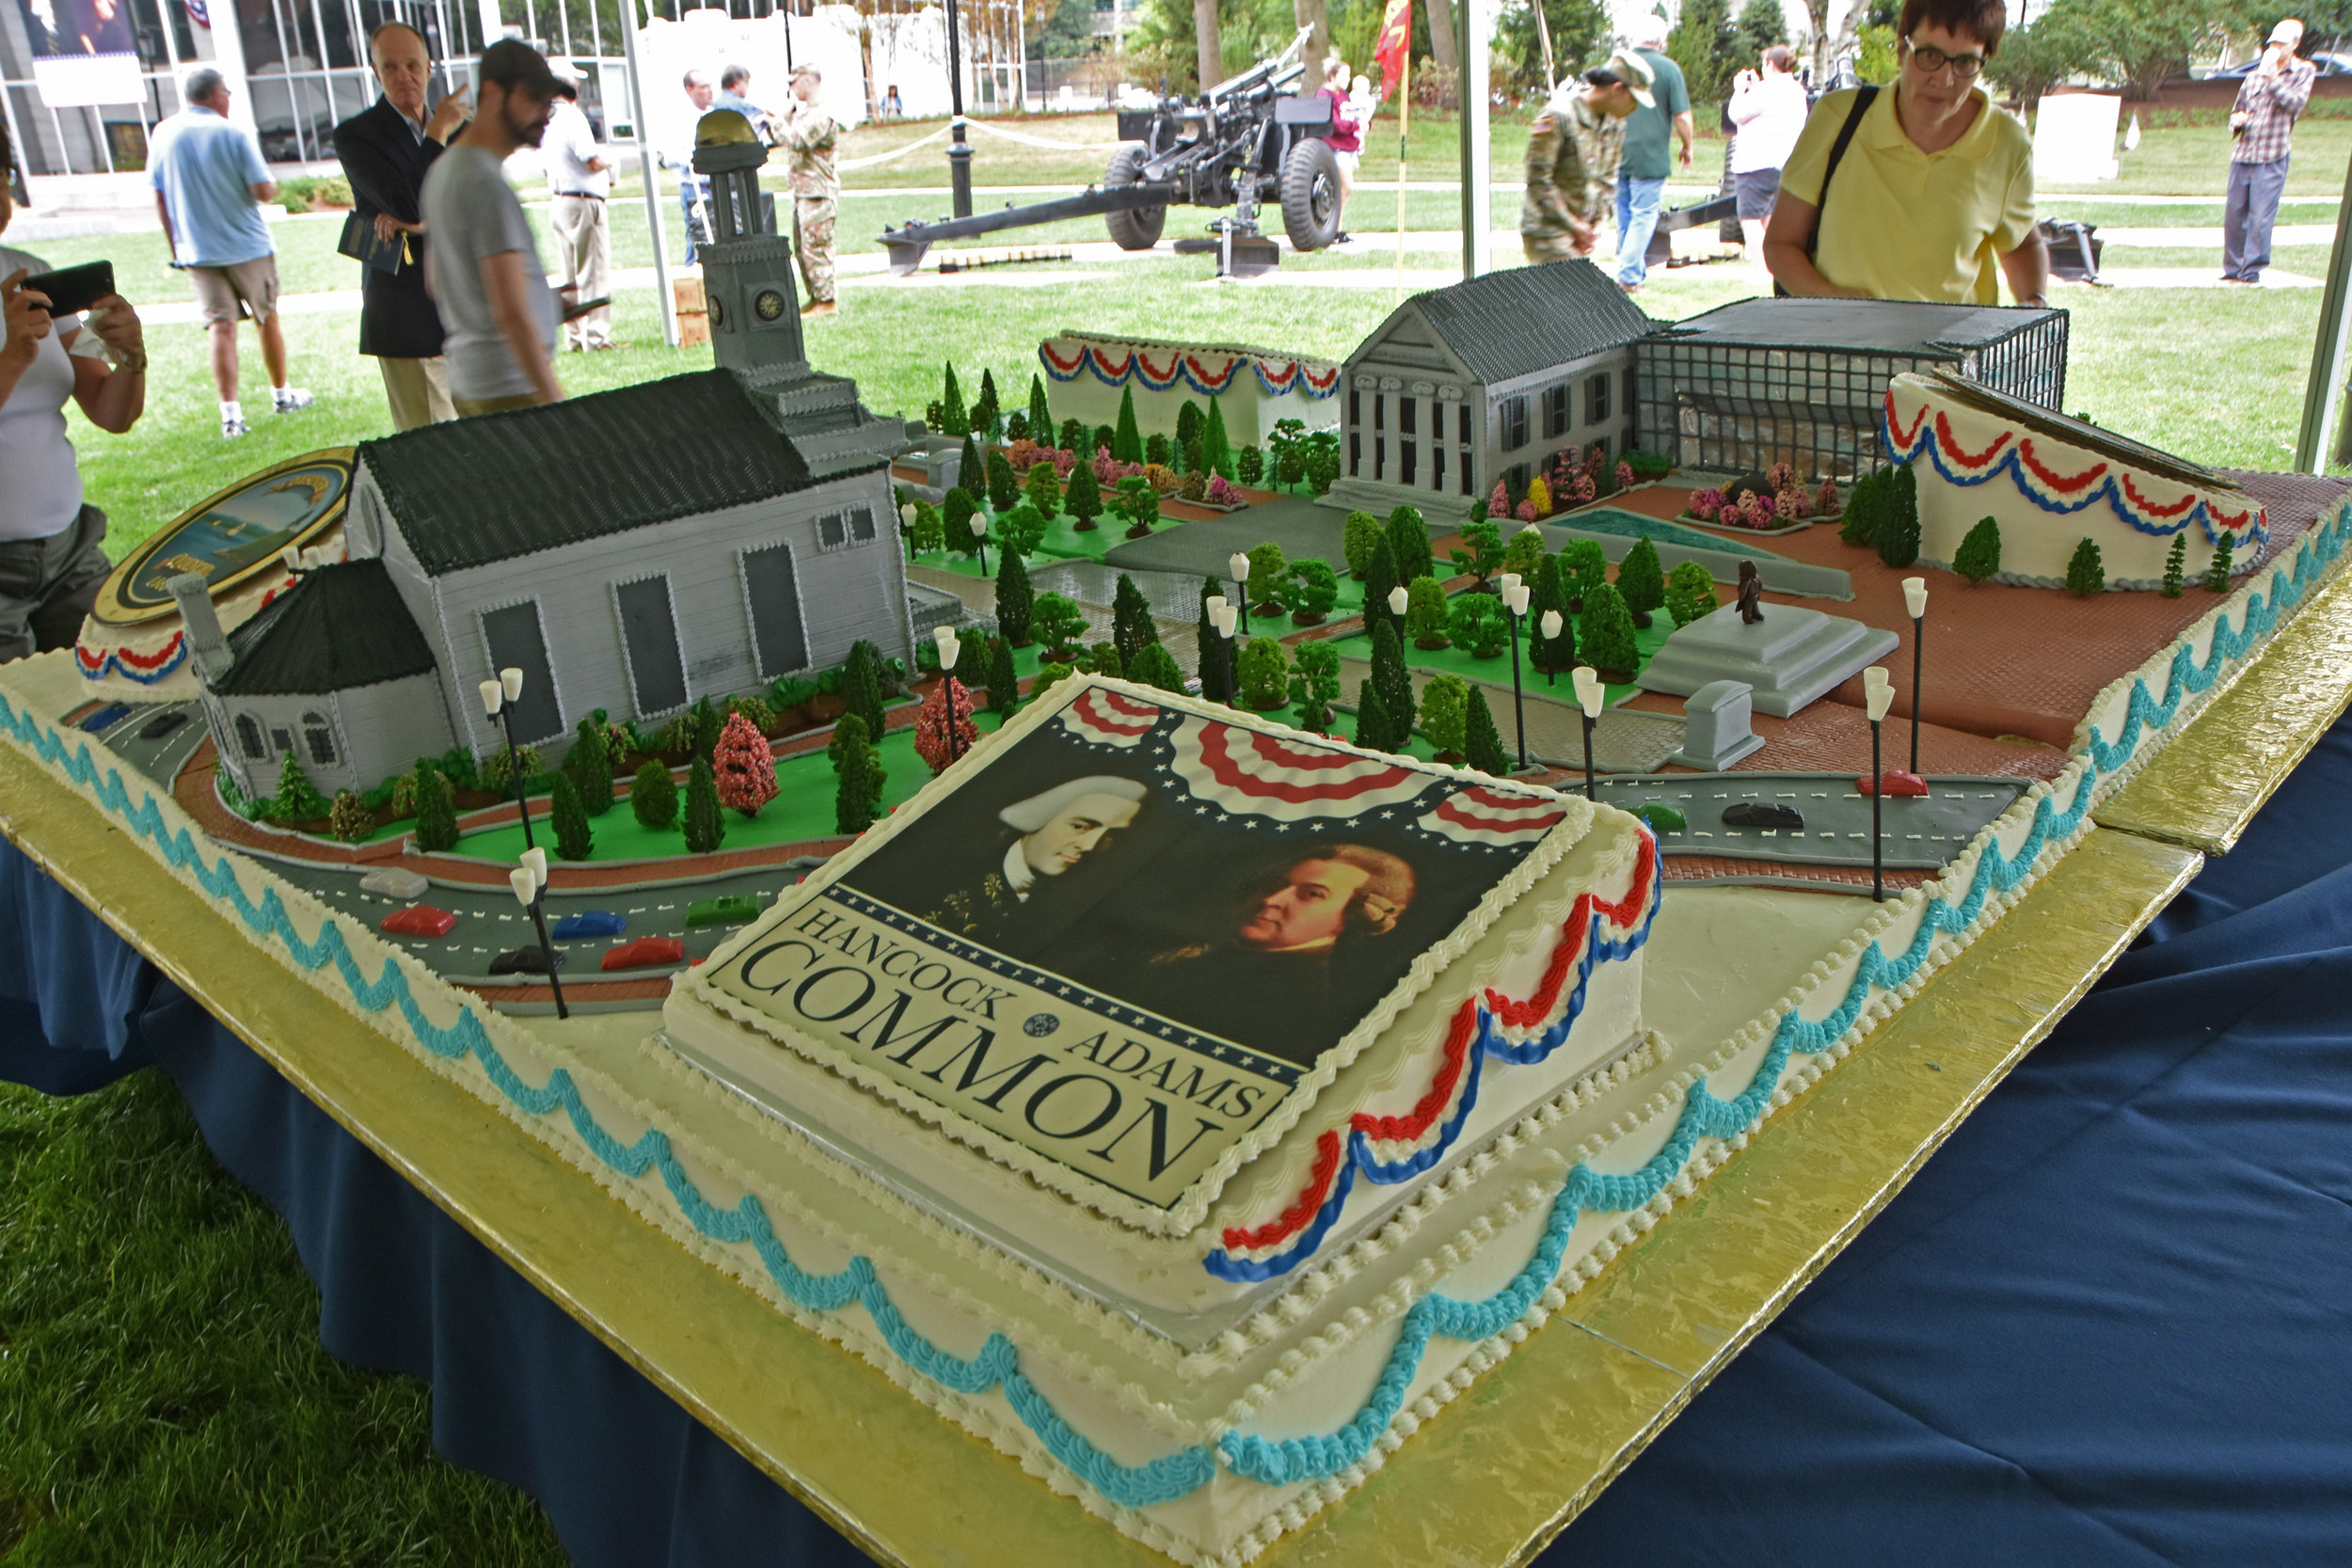  Montilio’s Bakery in Brockton created a replica of the park in cake form. 